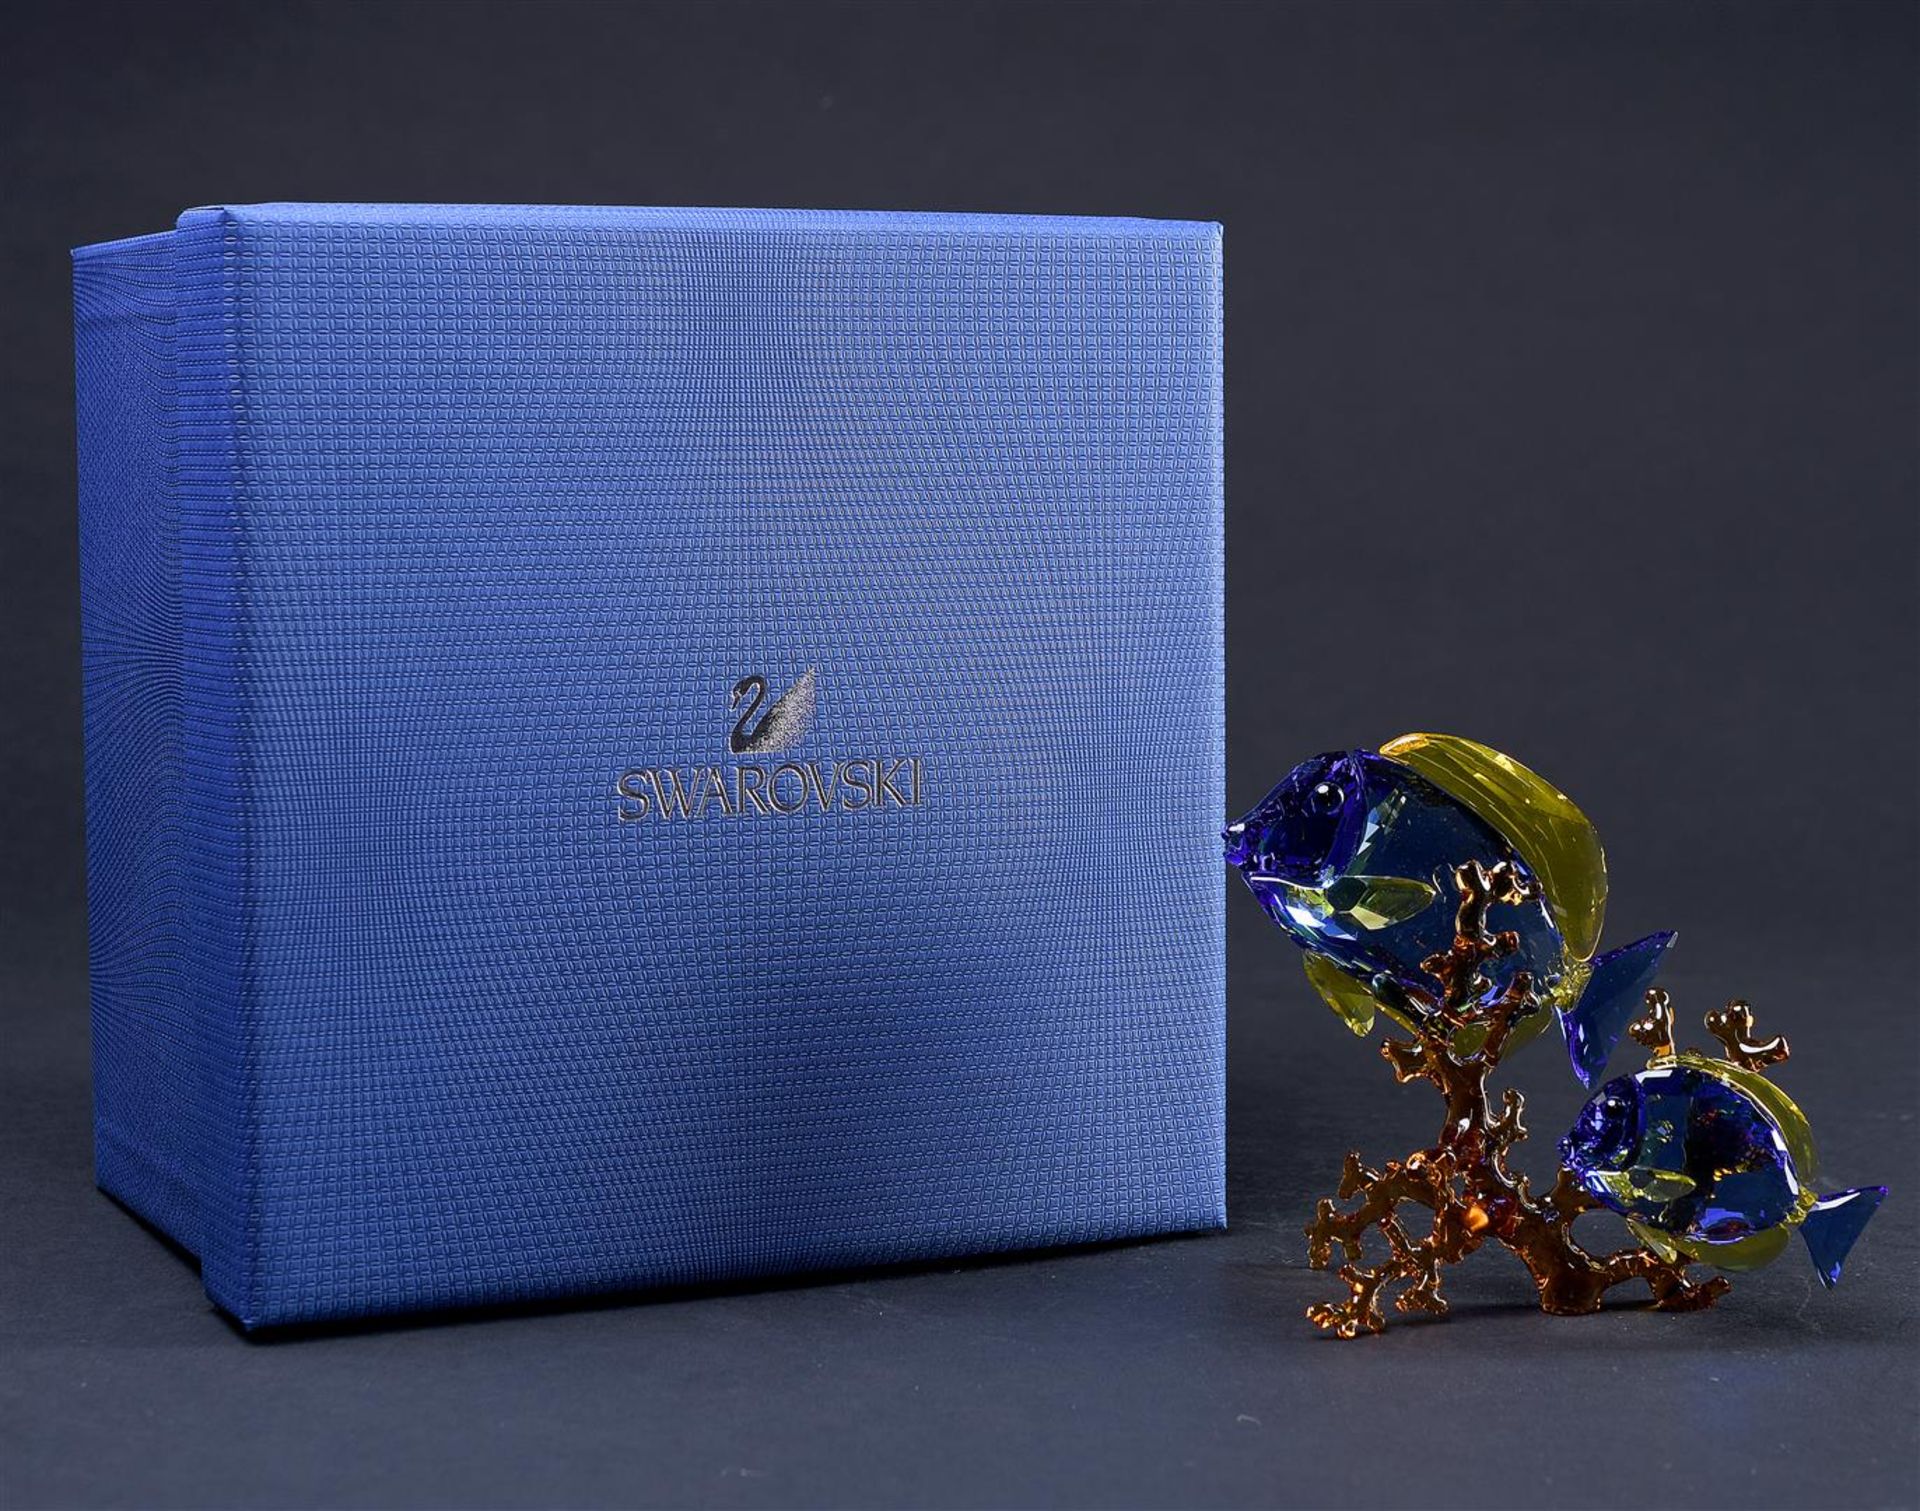 Swarovski, doctor's fish, year of issue 2016, 5223194. Includes original box.
10,5 x 12,5 x 6,4 cm. - Image 6 of 6